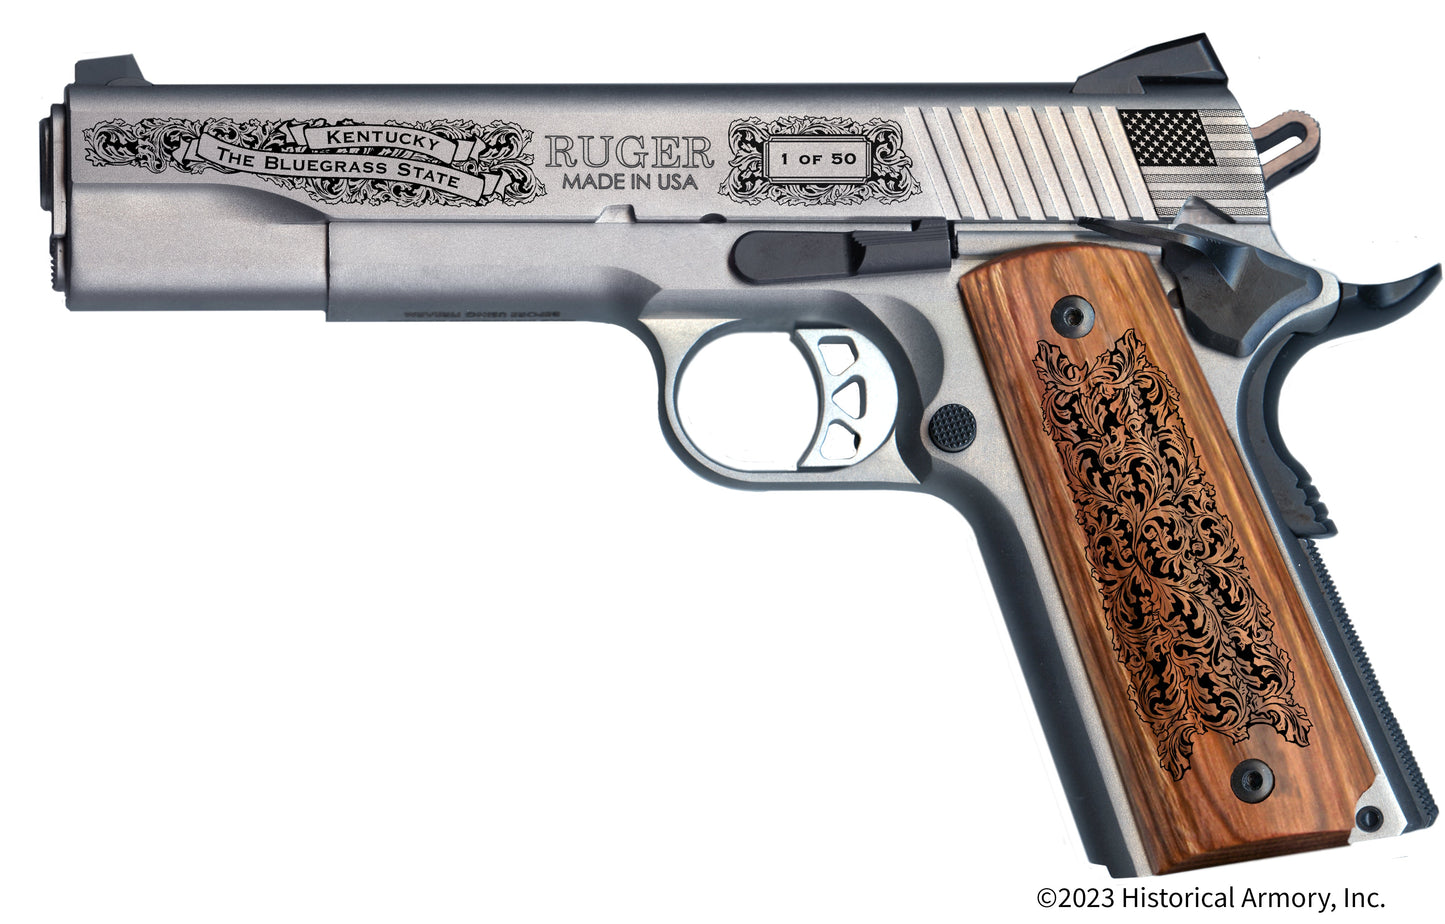 Russell County Kentucky Engraved .45 Auto Ruger 1911